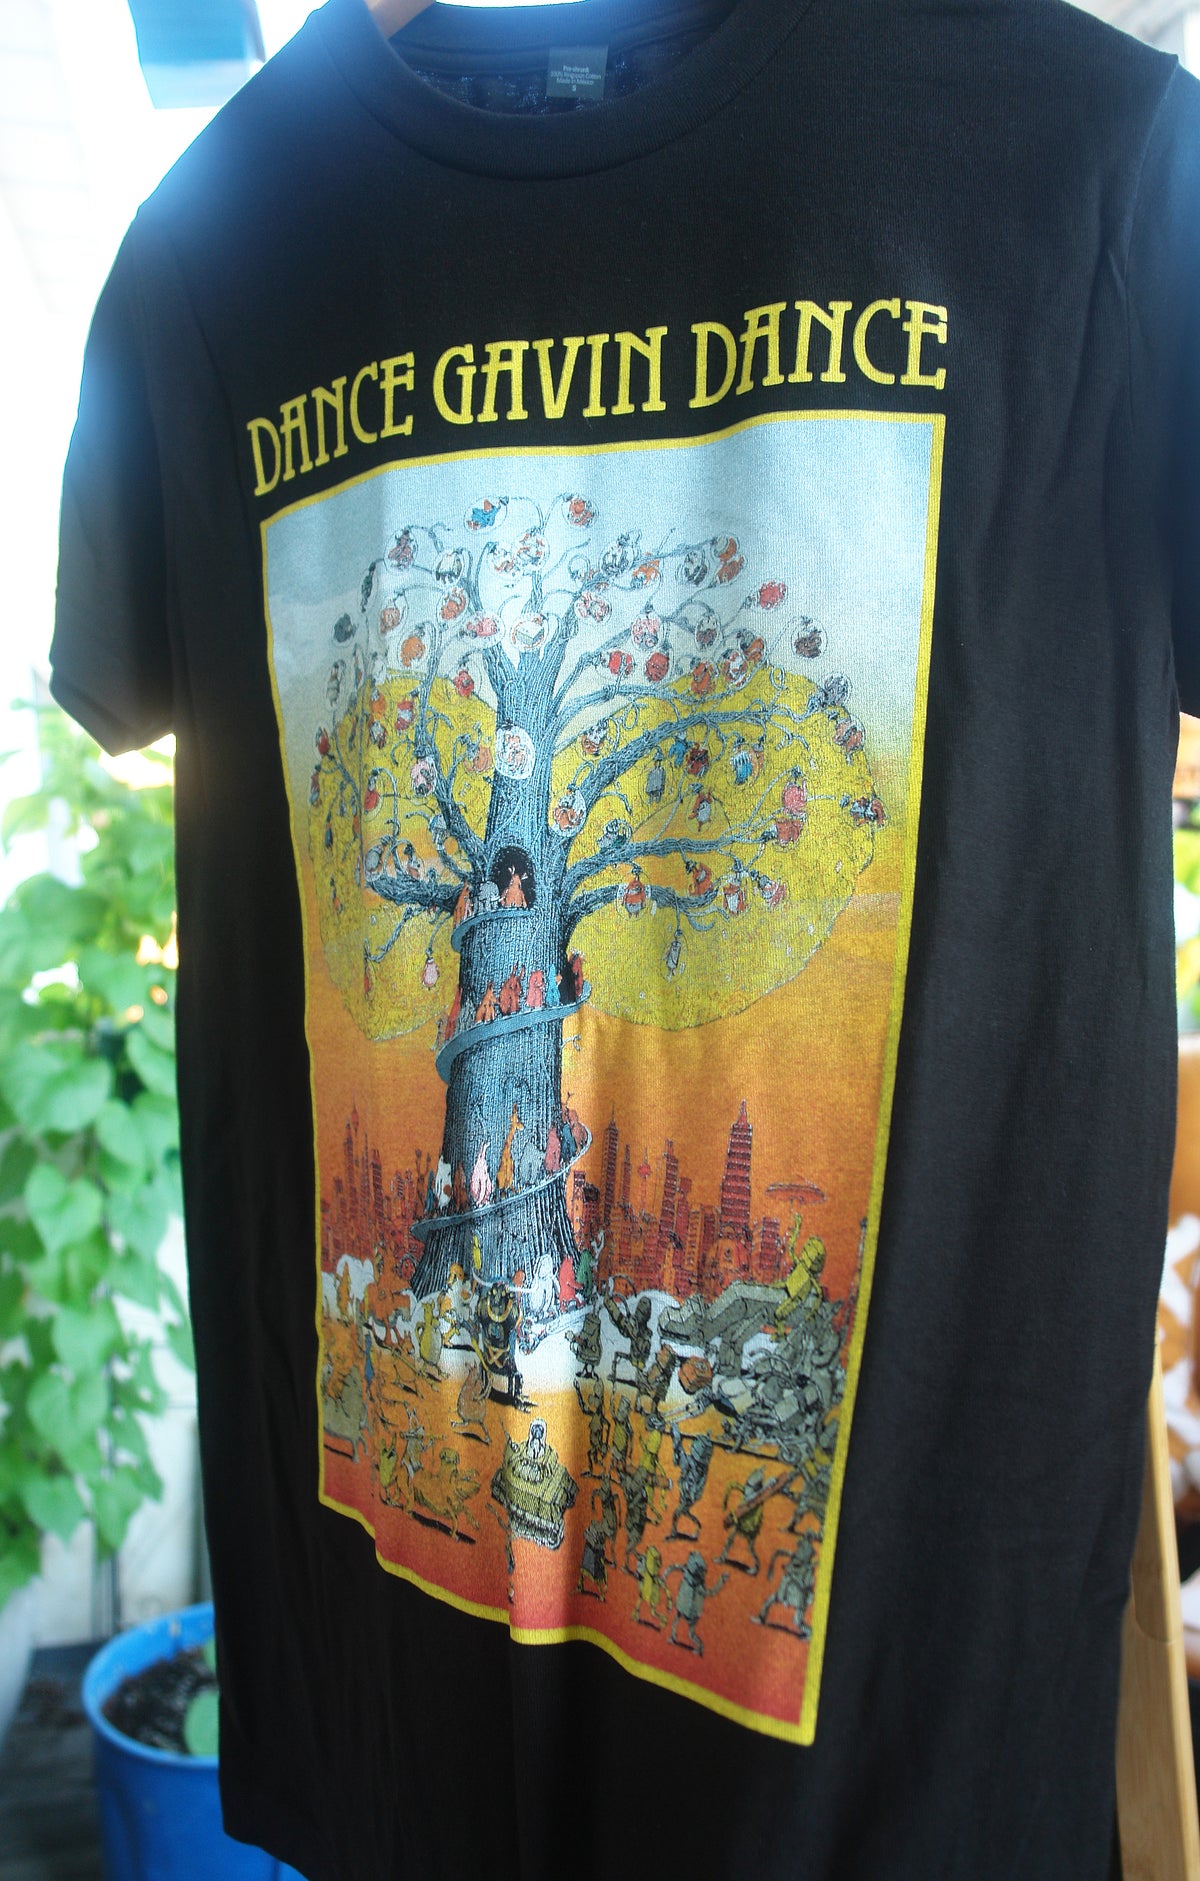 close up of black tee shirt in front of green leaves black tee shirt has full chest print with yellow print on top that says dance gavin dance and a rectangle below that shows a multicolored tree with several characters surrounding it.